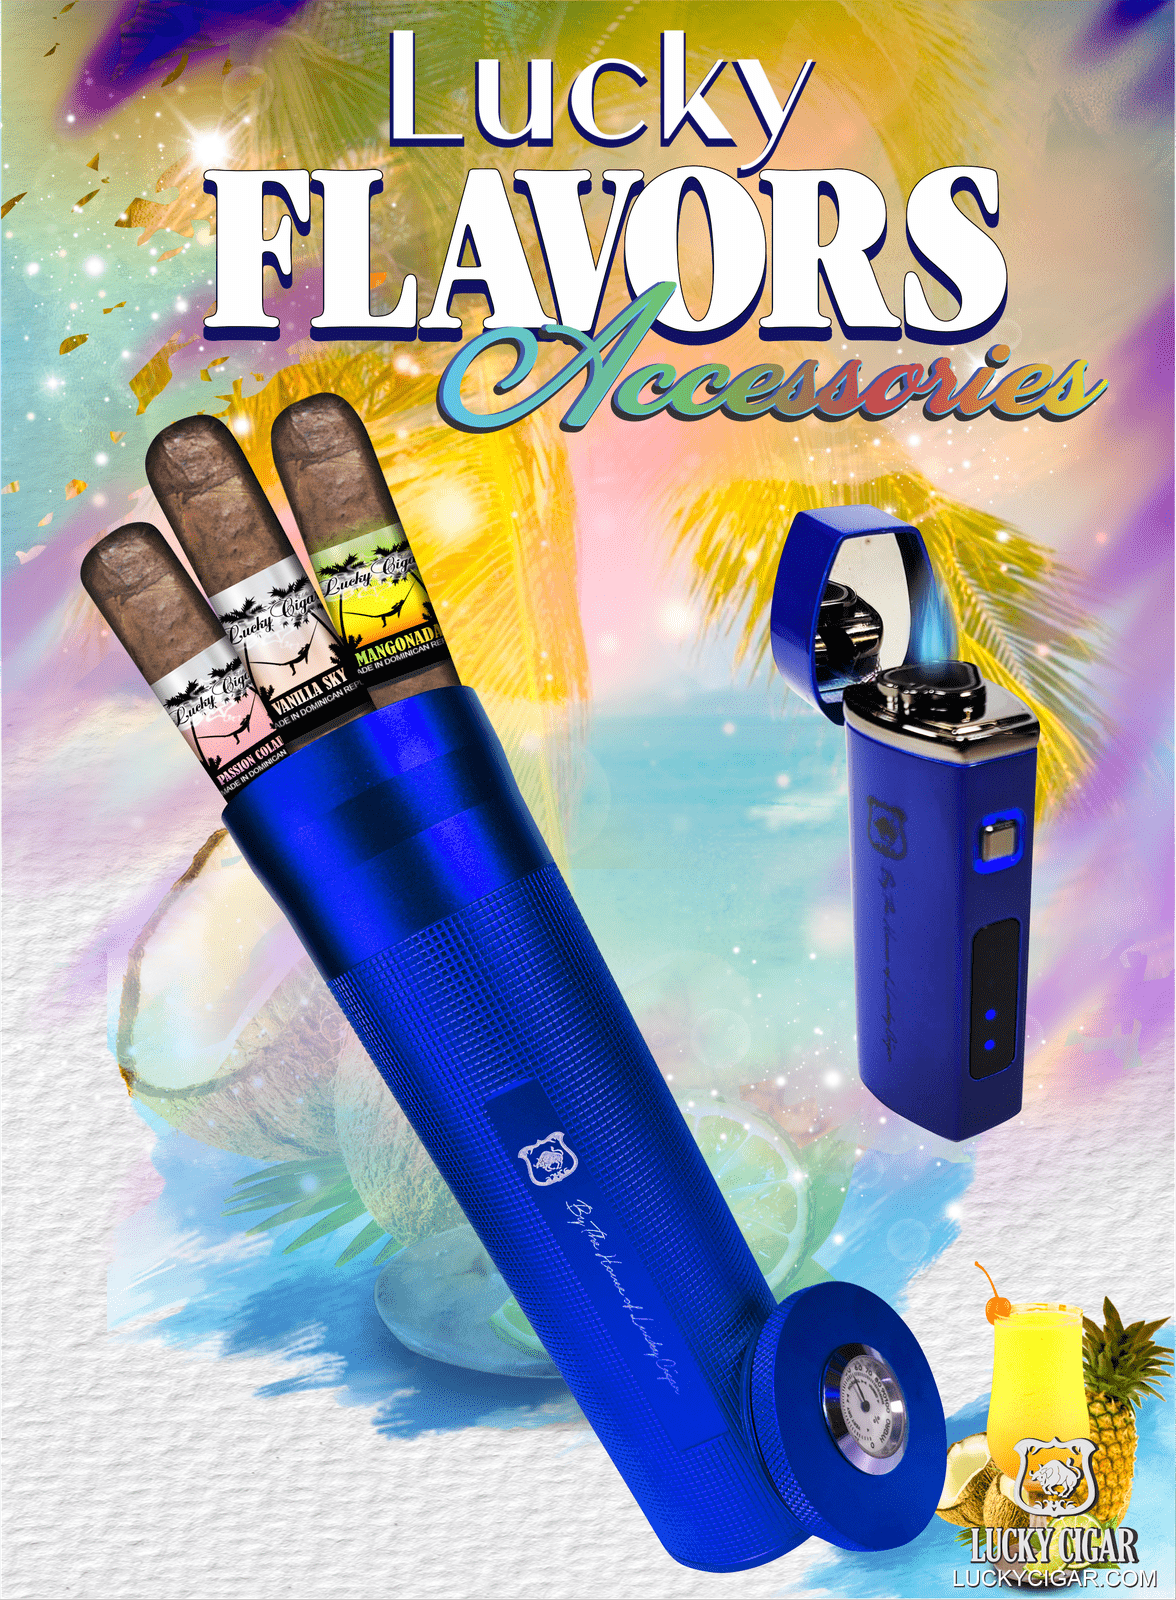 Flavored Cigars: Lucky Flavors 3 Cigar Set with Blue Torch and Travel Humidor 